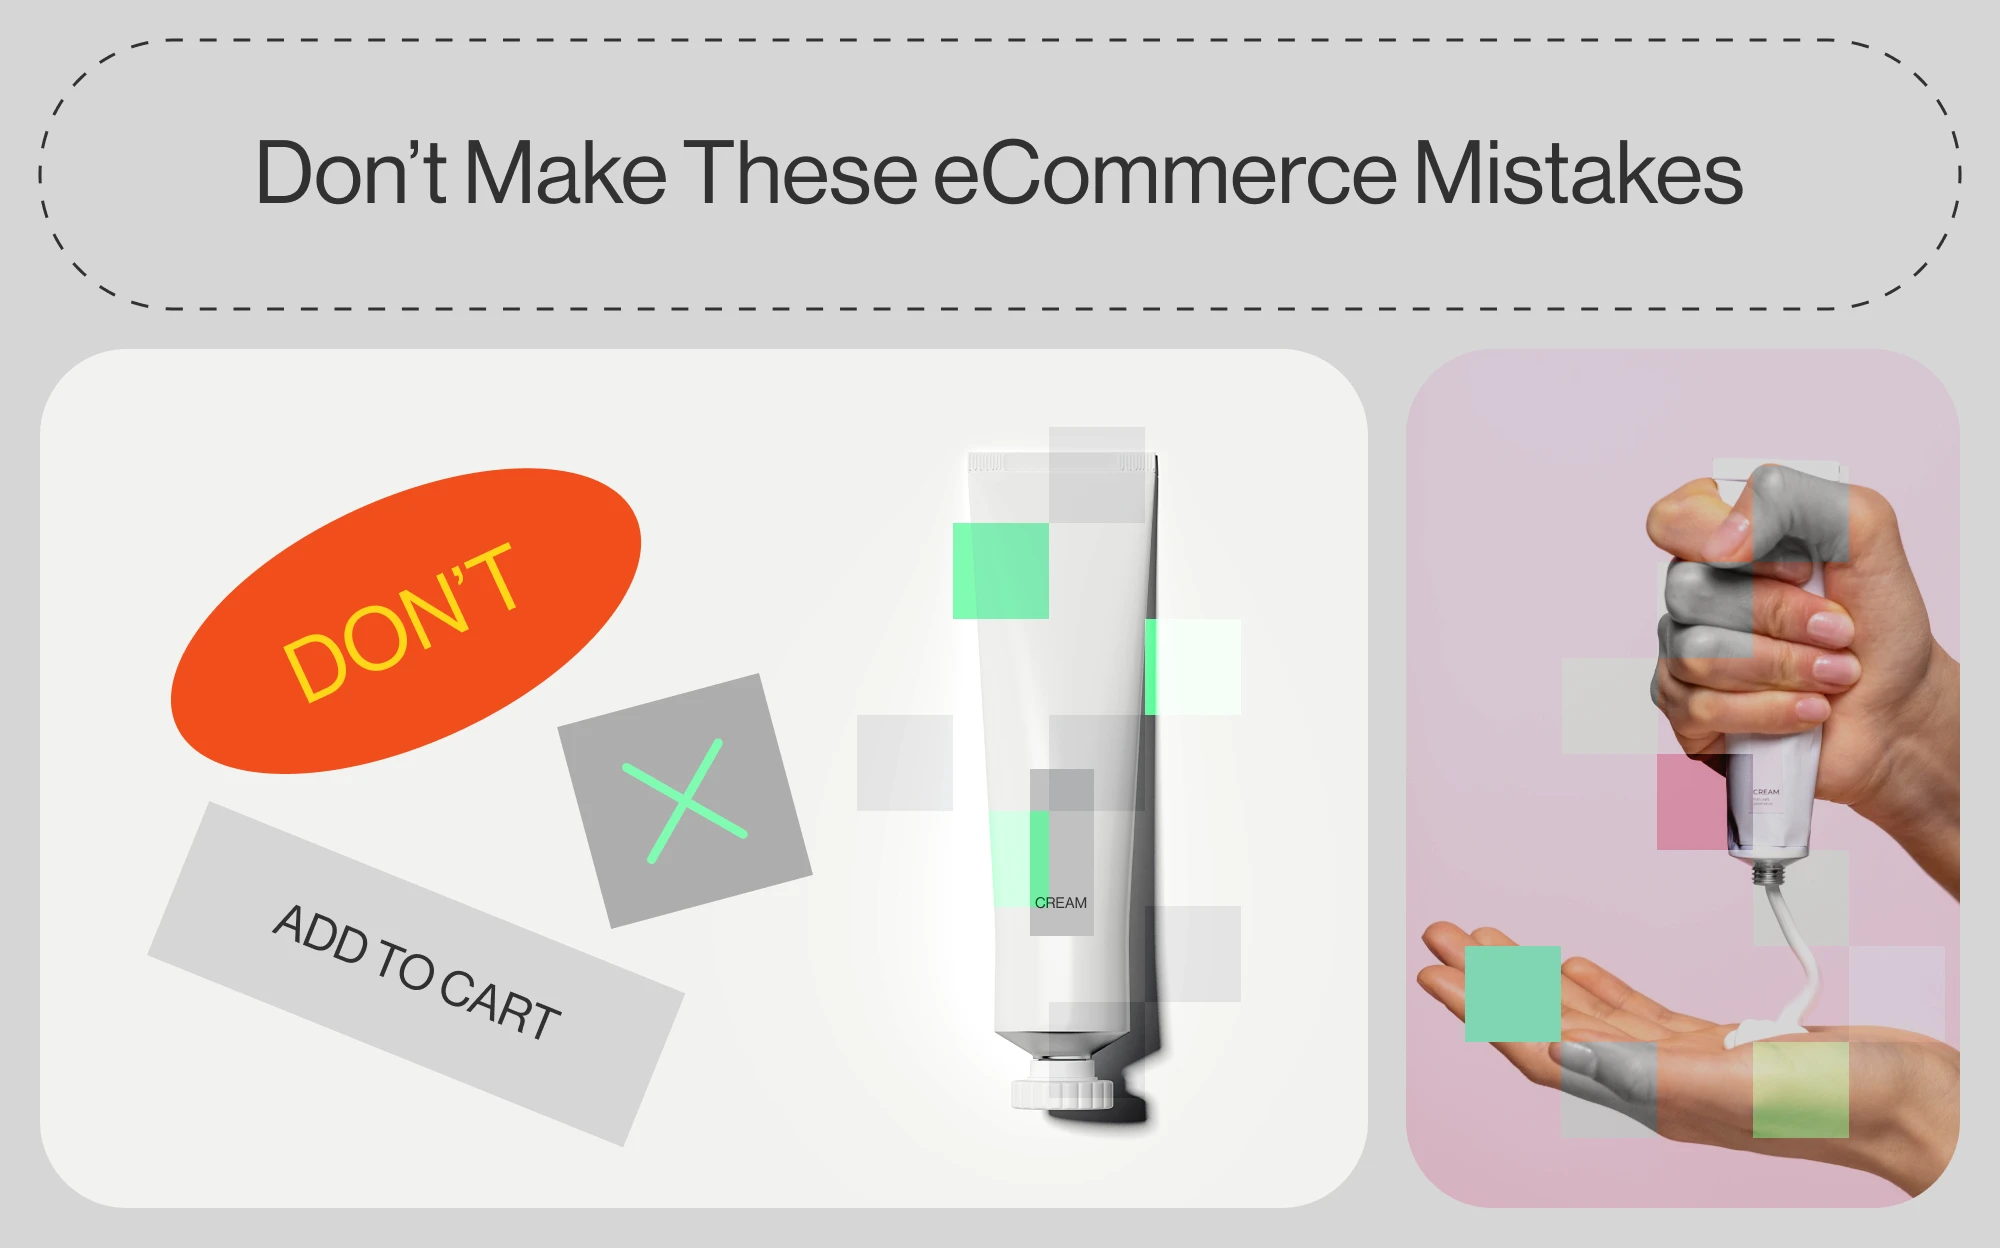 6 Underrated Reasons Why Your Online Store Is Failing: Number 3 Will Not Surprise You